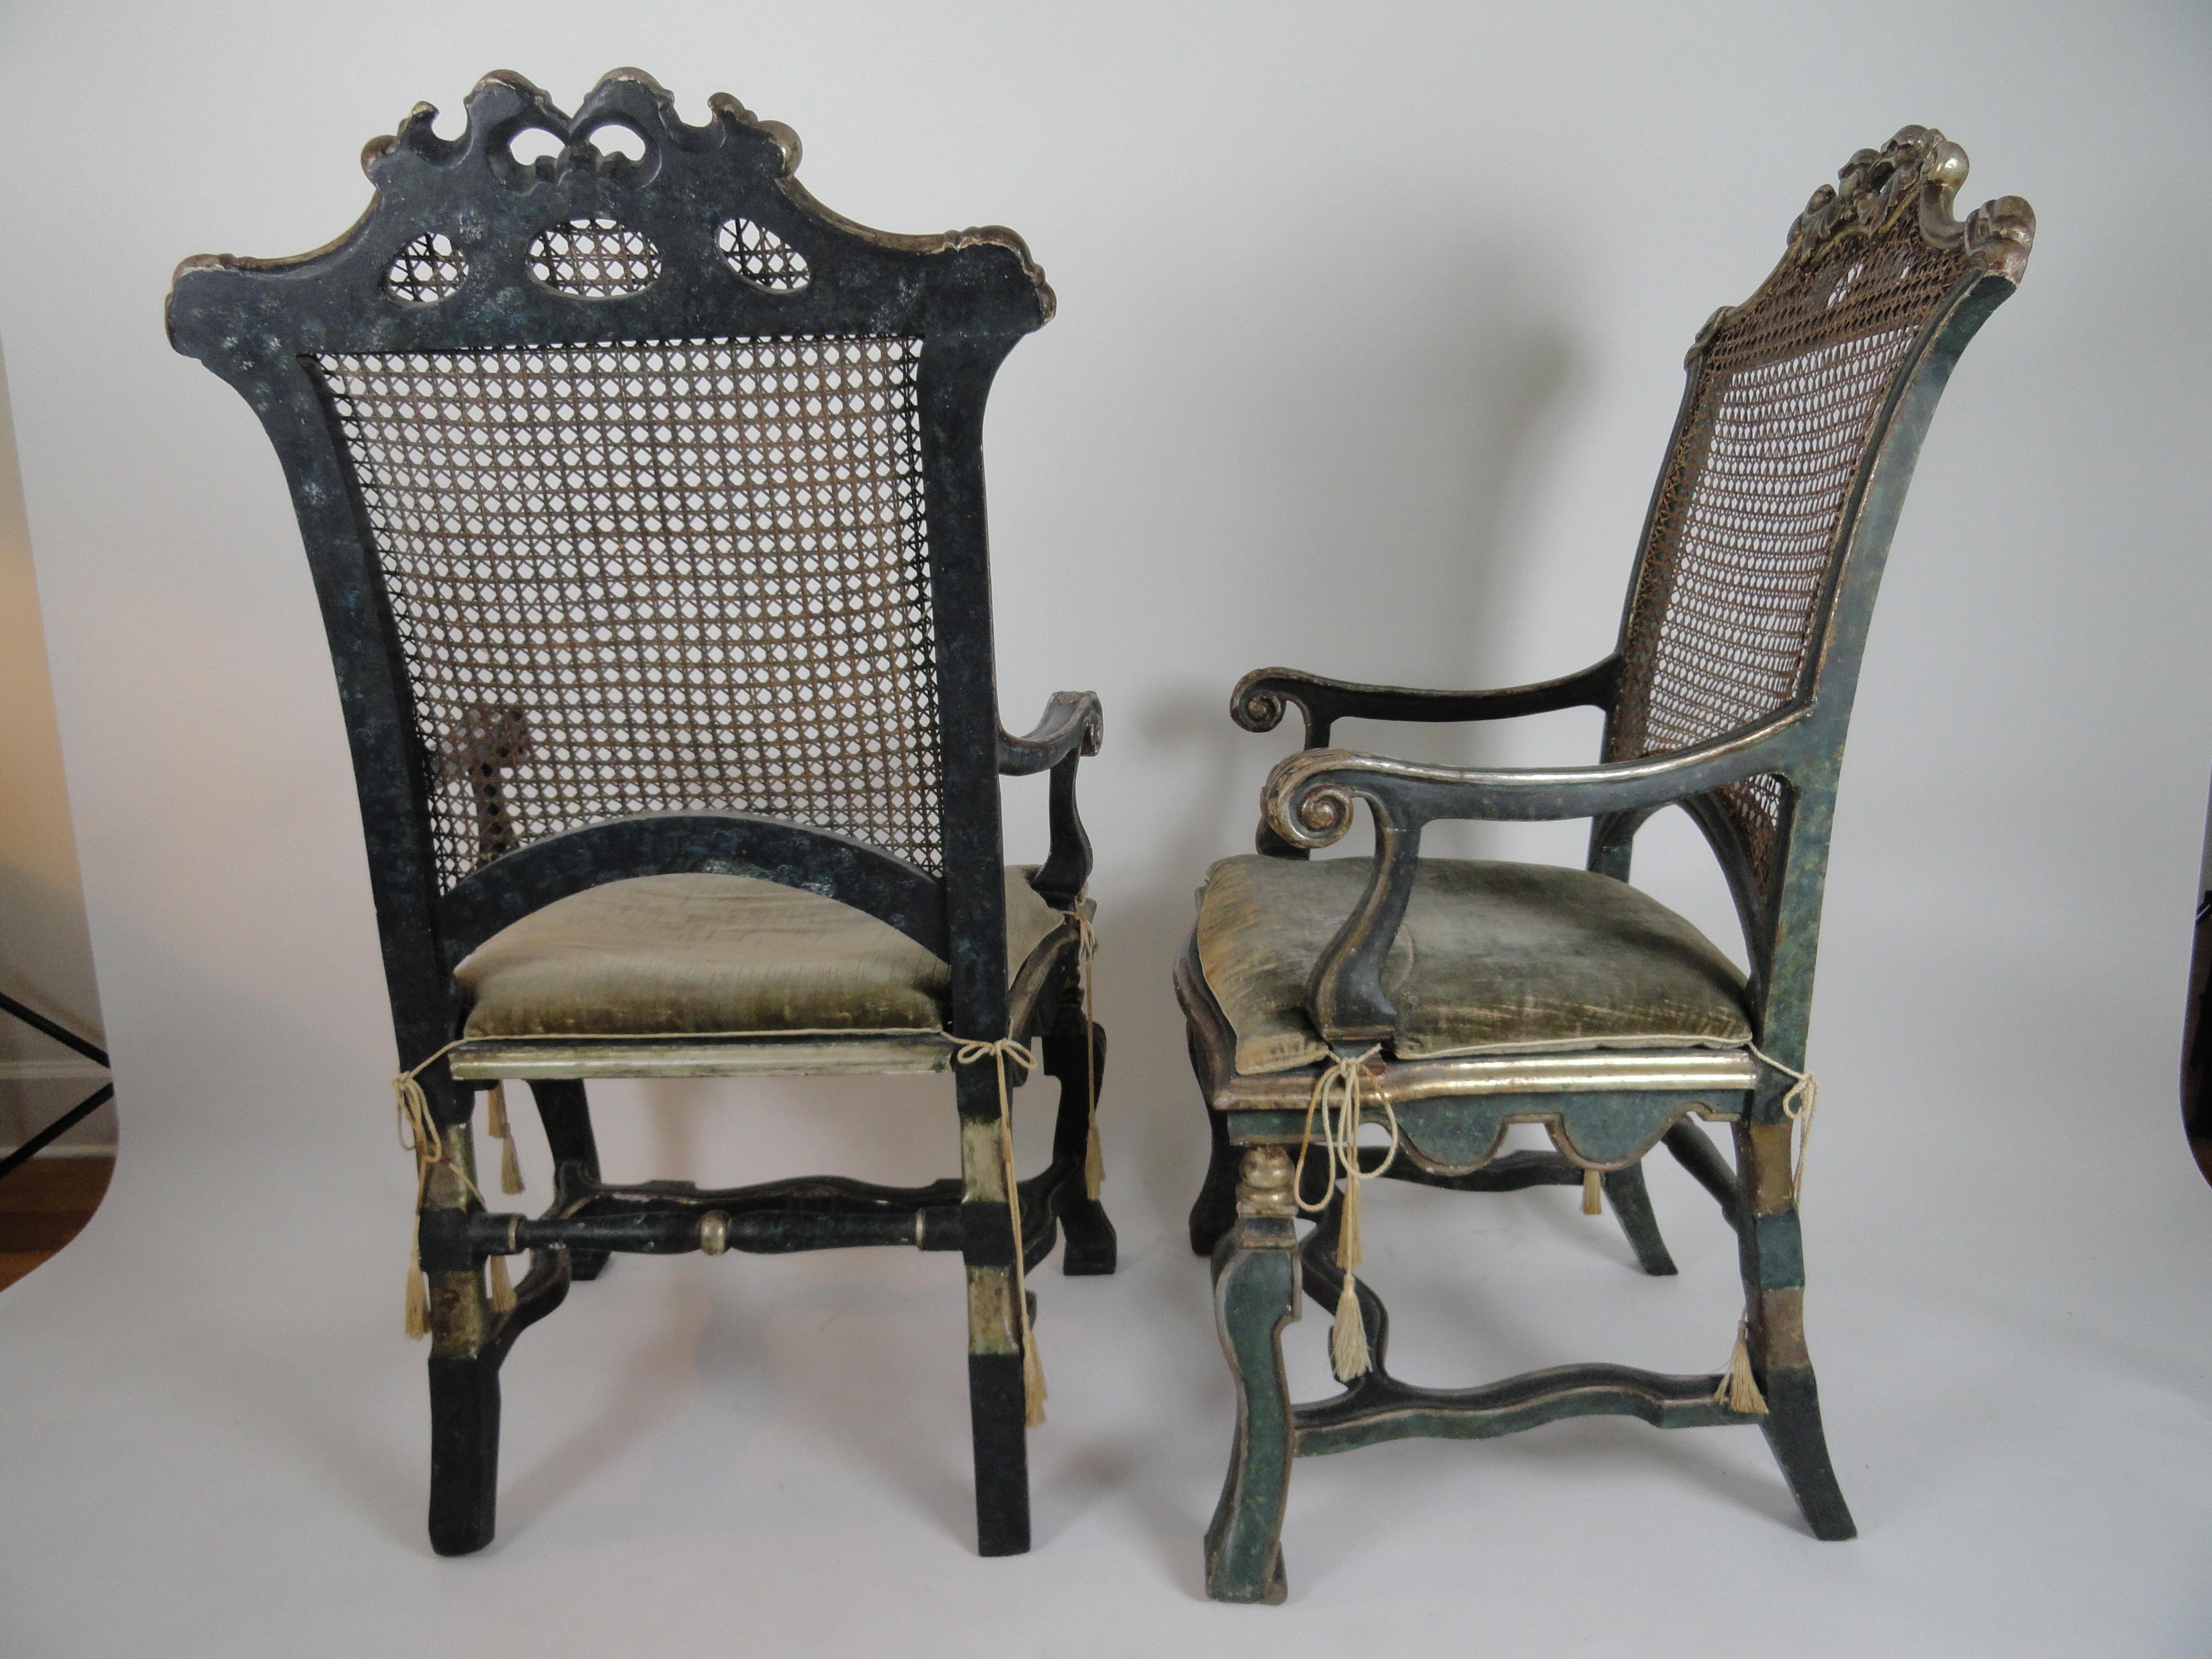 The rectangular caned back with molded frame and shaped projecting crest rail with centred carved cresting of facing heraldic eagles, joined to framed caned seat with pelmet shaped apron by scrolling molded arms on vasiform supports, raised on